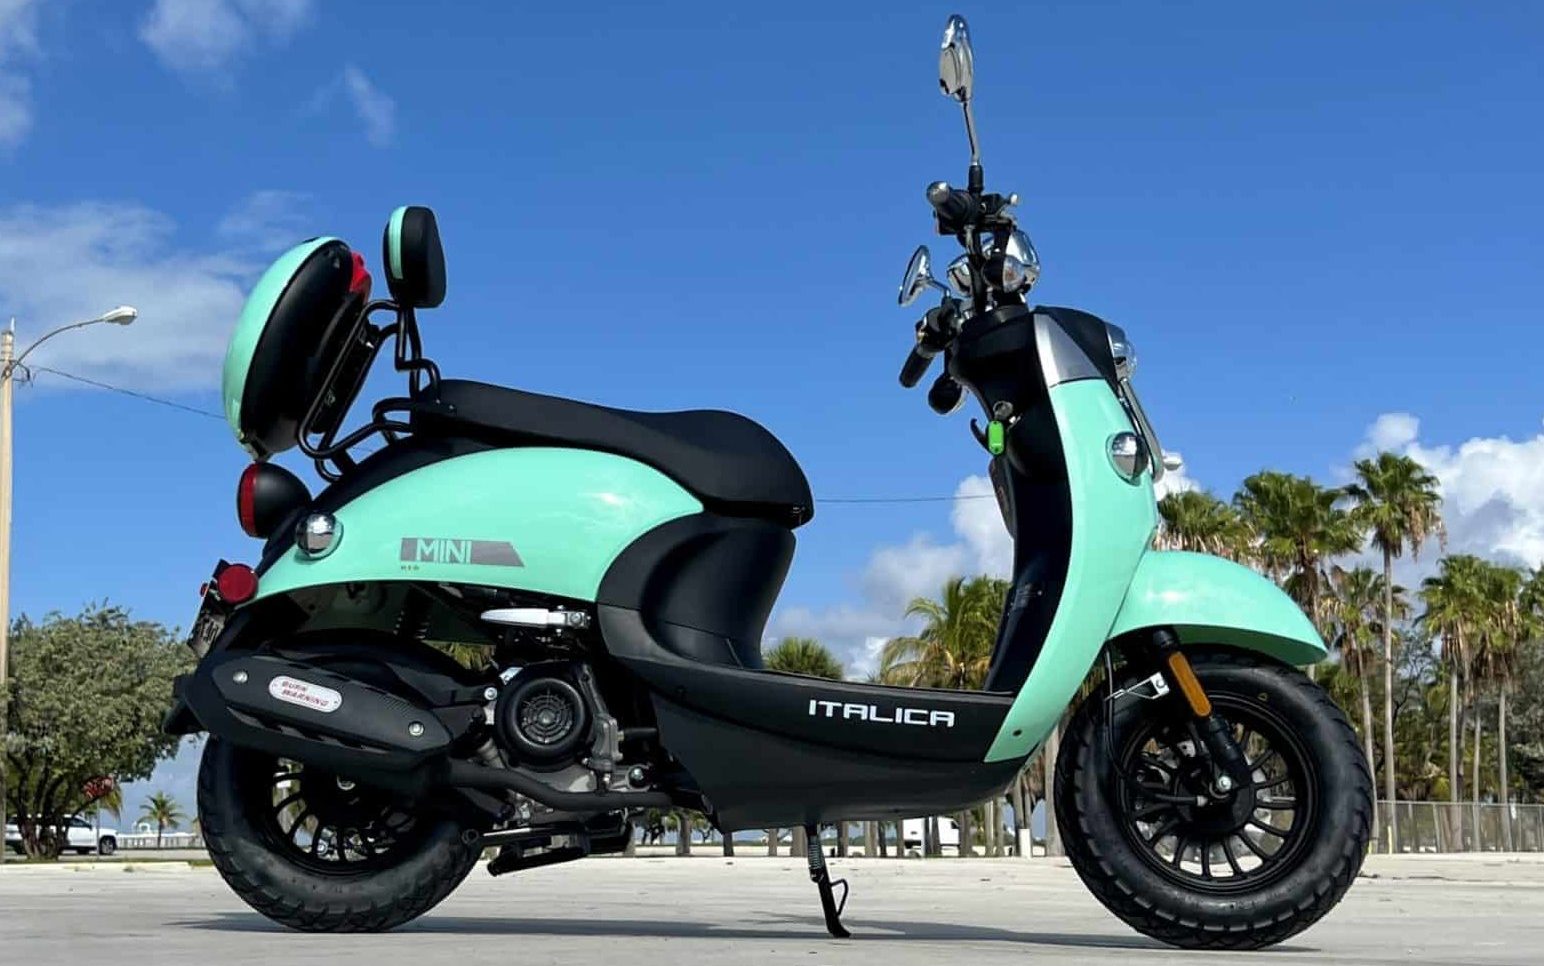 italica-age-50cc-cyan-scooter-rental-right